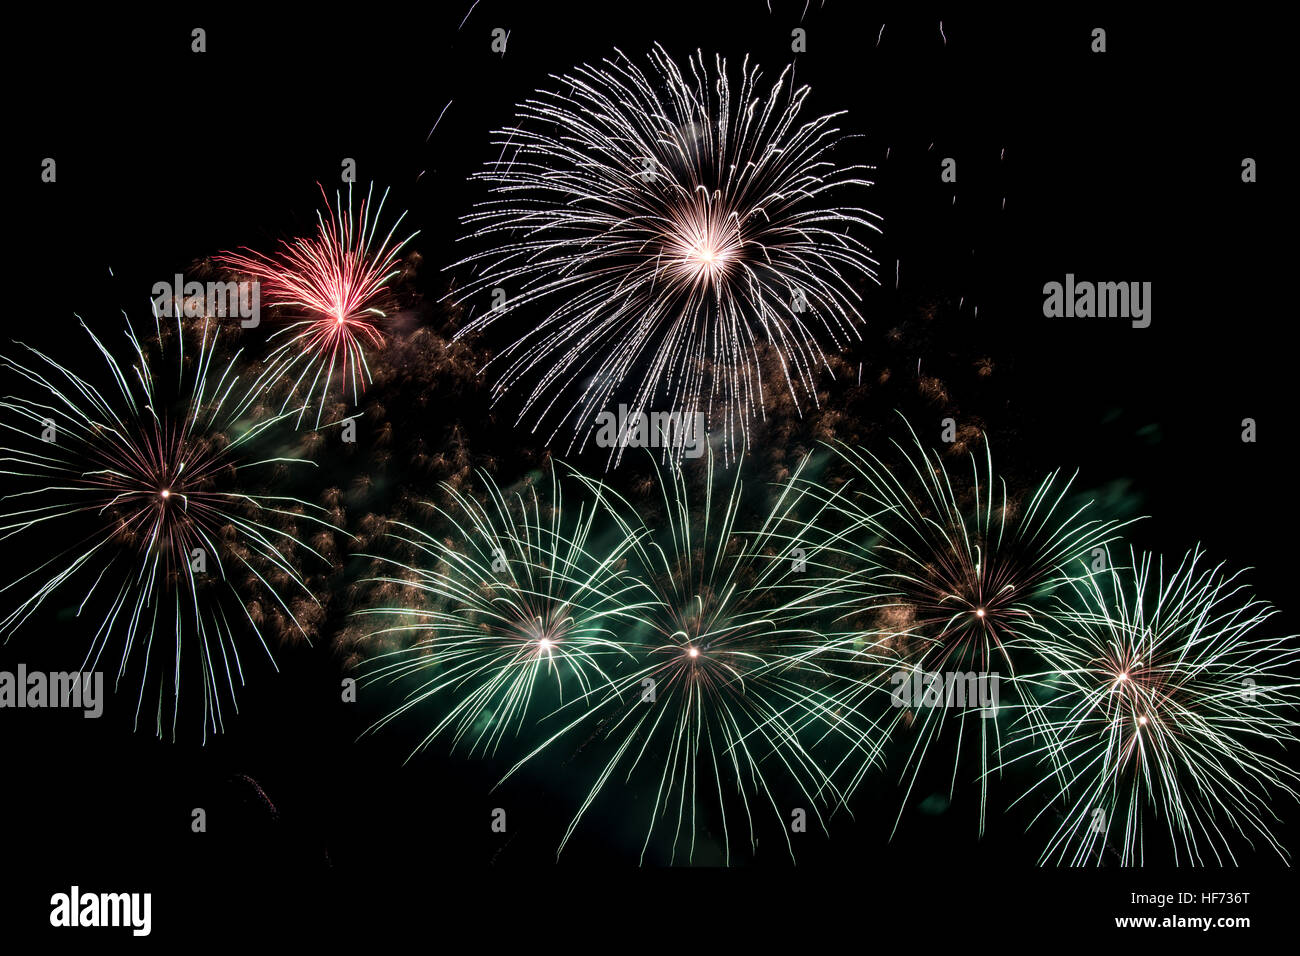 Fireworks colorful explosion of color brightness uae dubai dfc guinness worl record holder Stock Photo